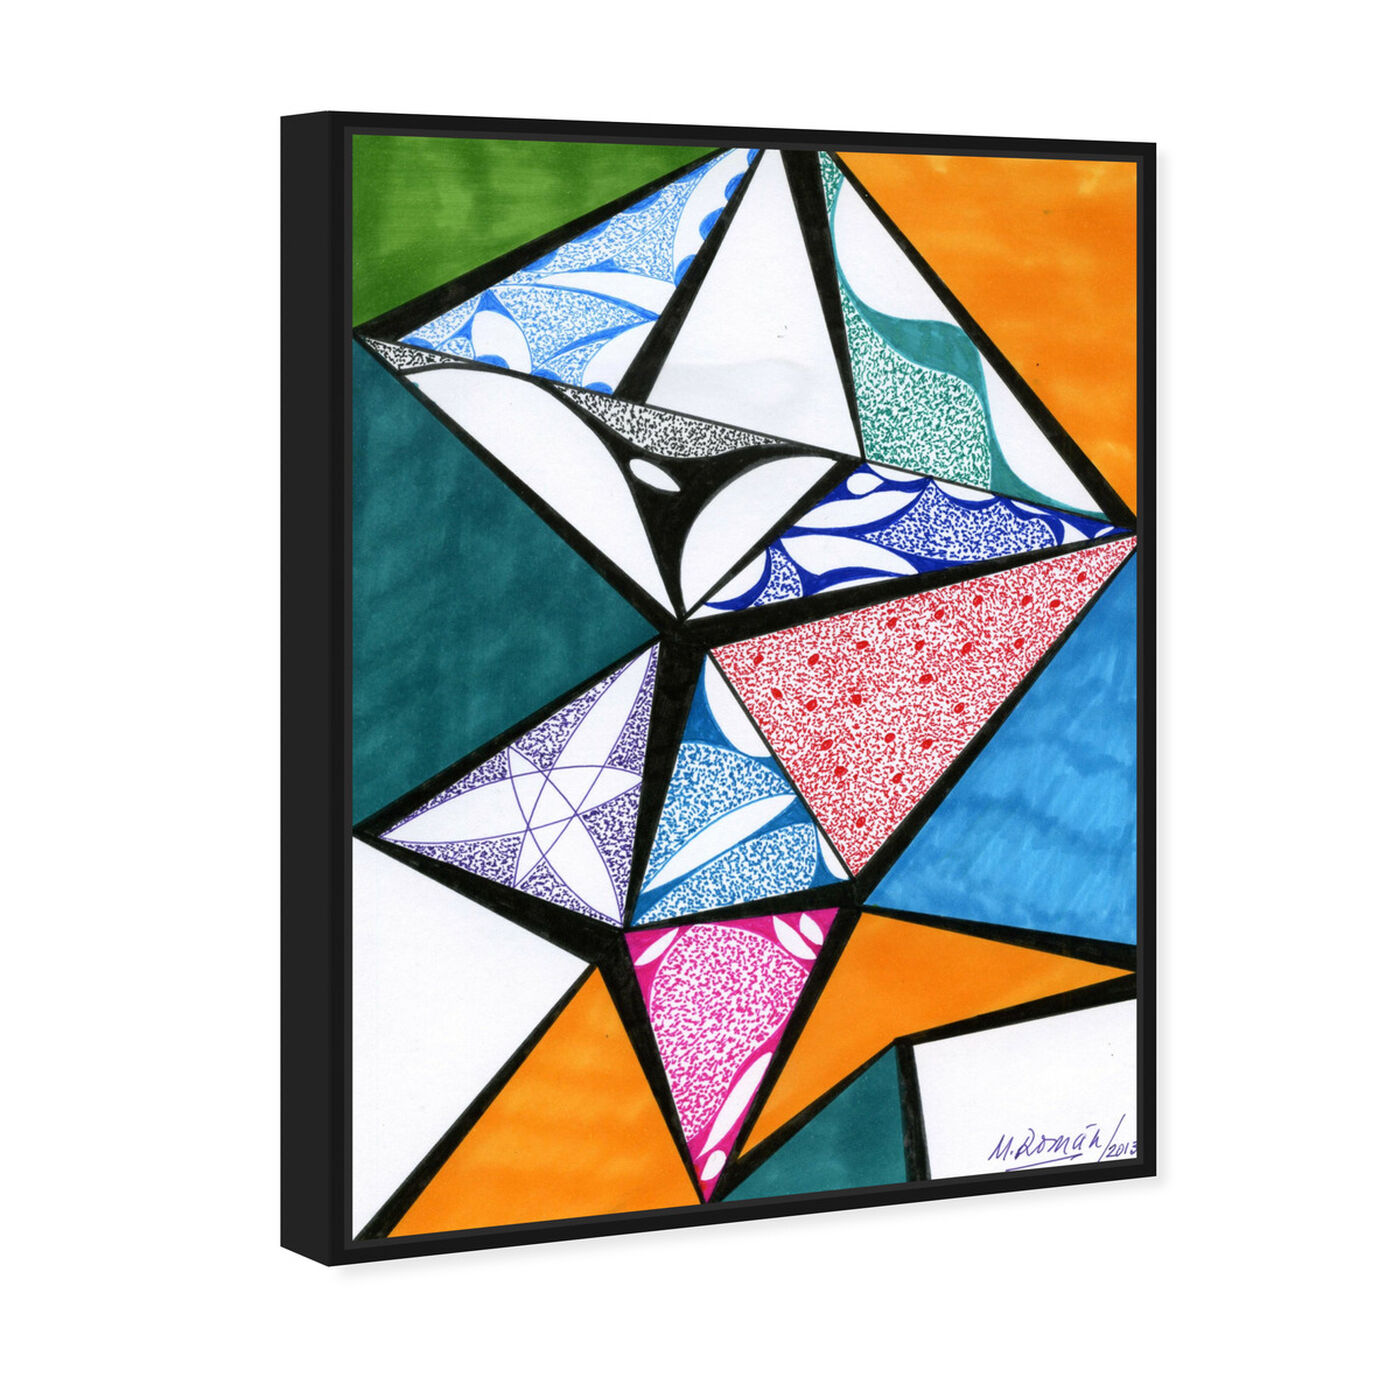 Angled view of Divided featuring abstract and geometric art.